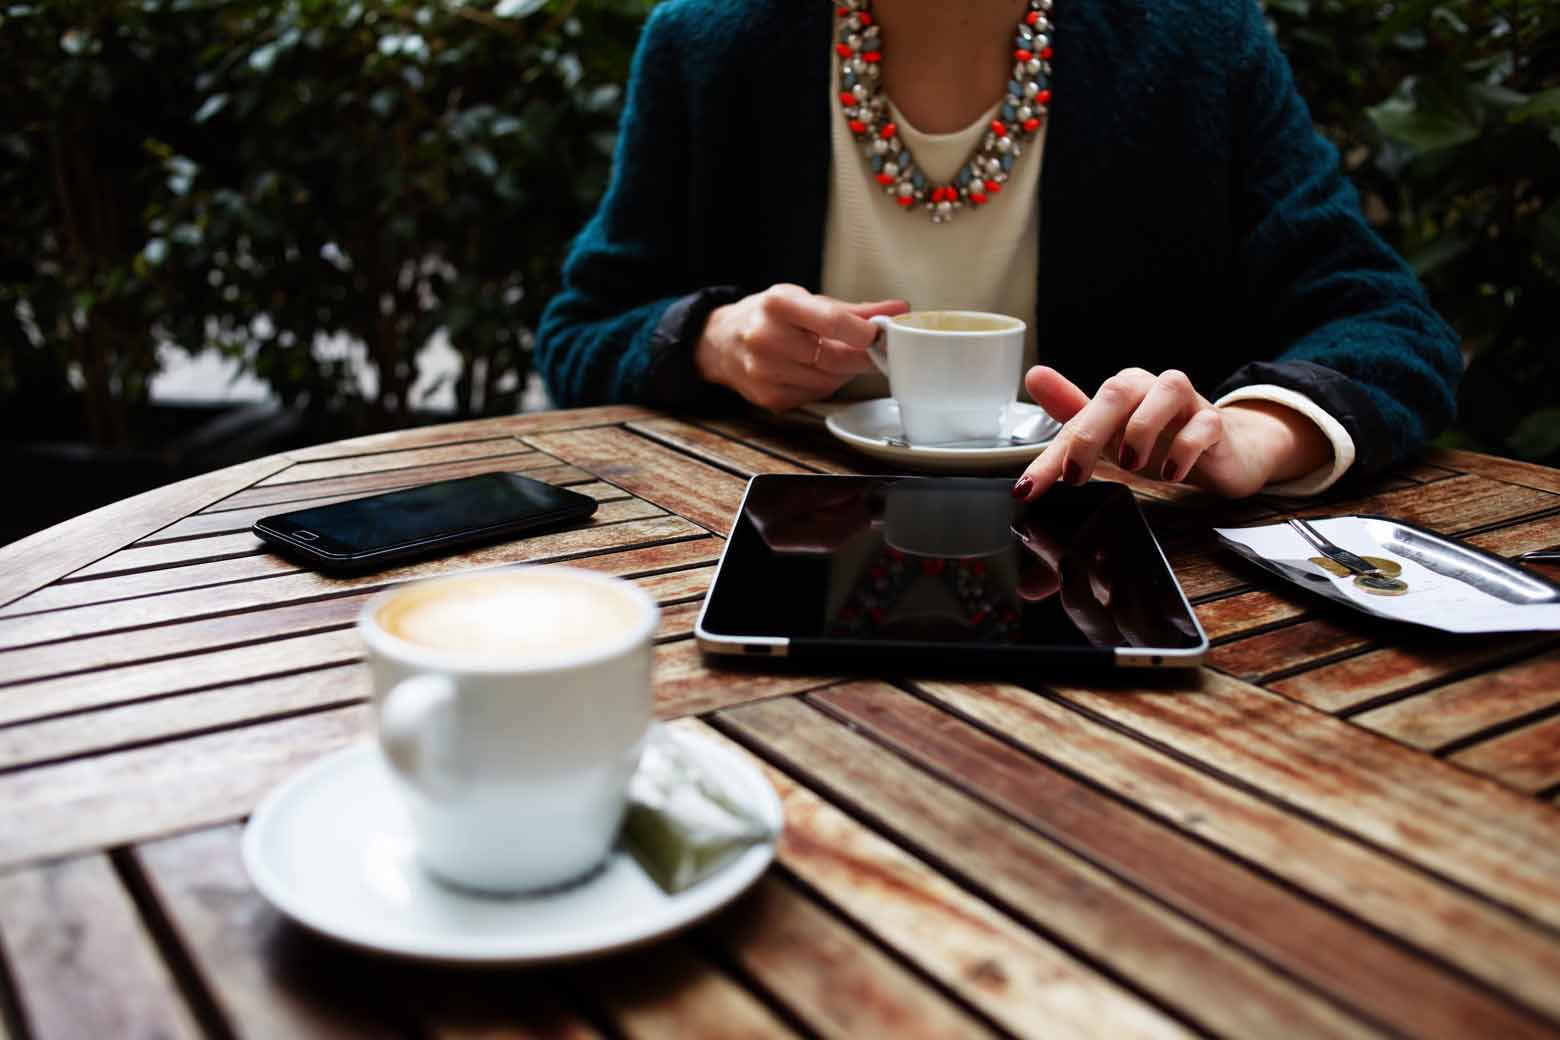 4 Apps That Will Make the Working Woman’s Life Simpler